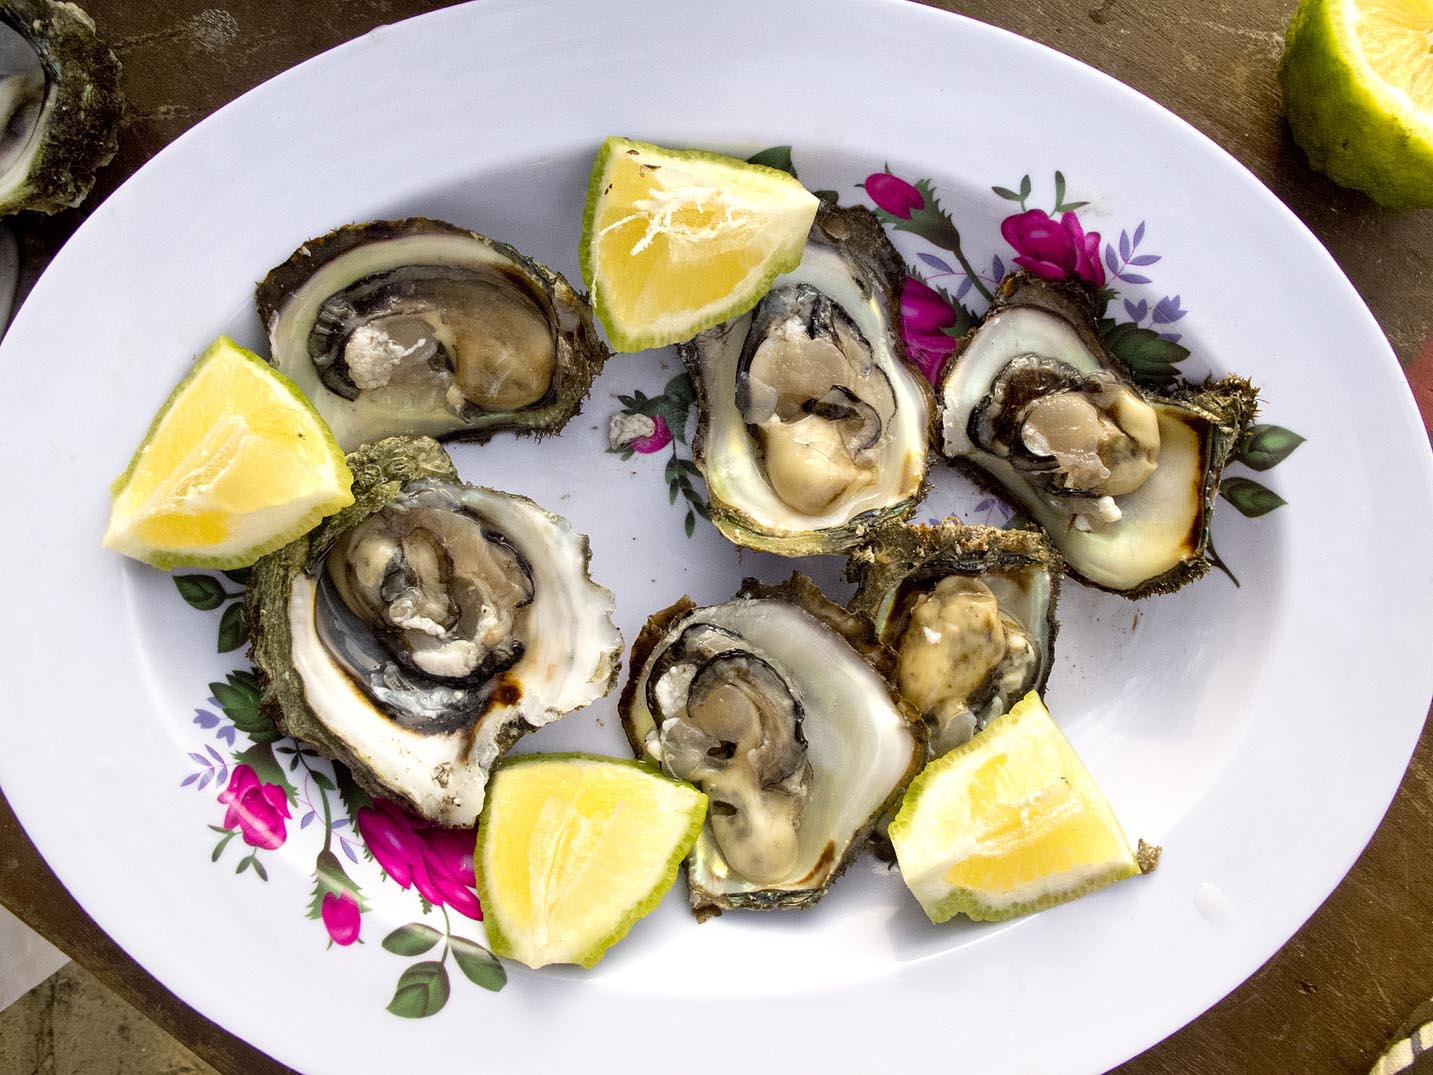 A plate of local oysters with lemon from Bureh Beach in Sierra Leone.